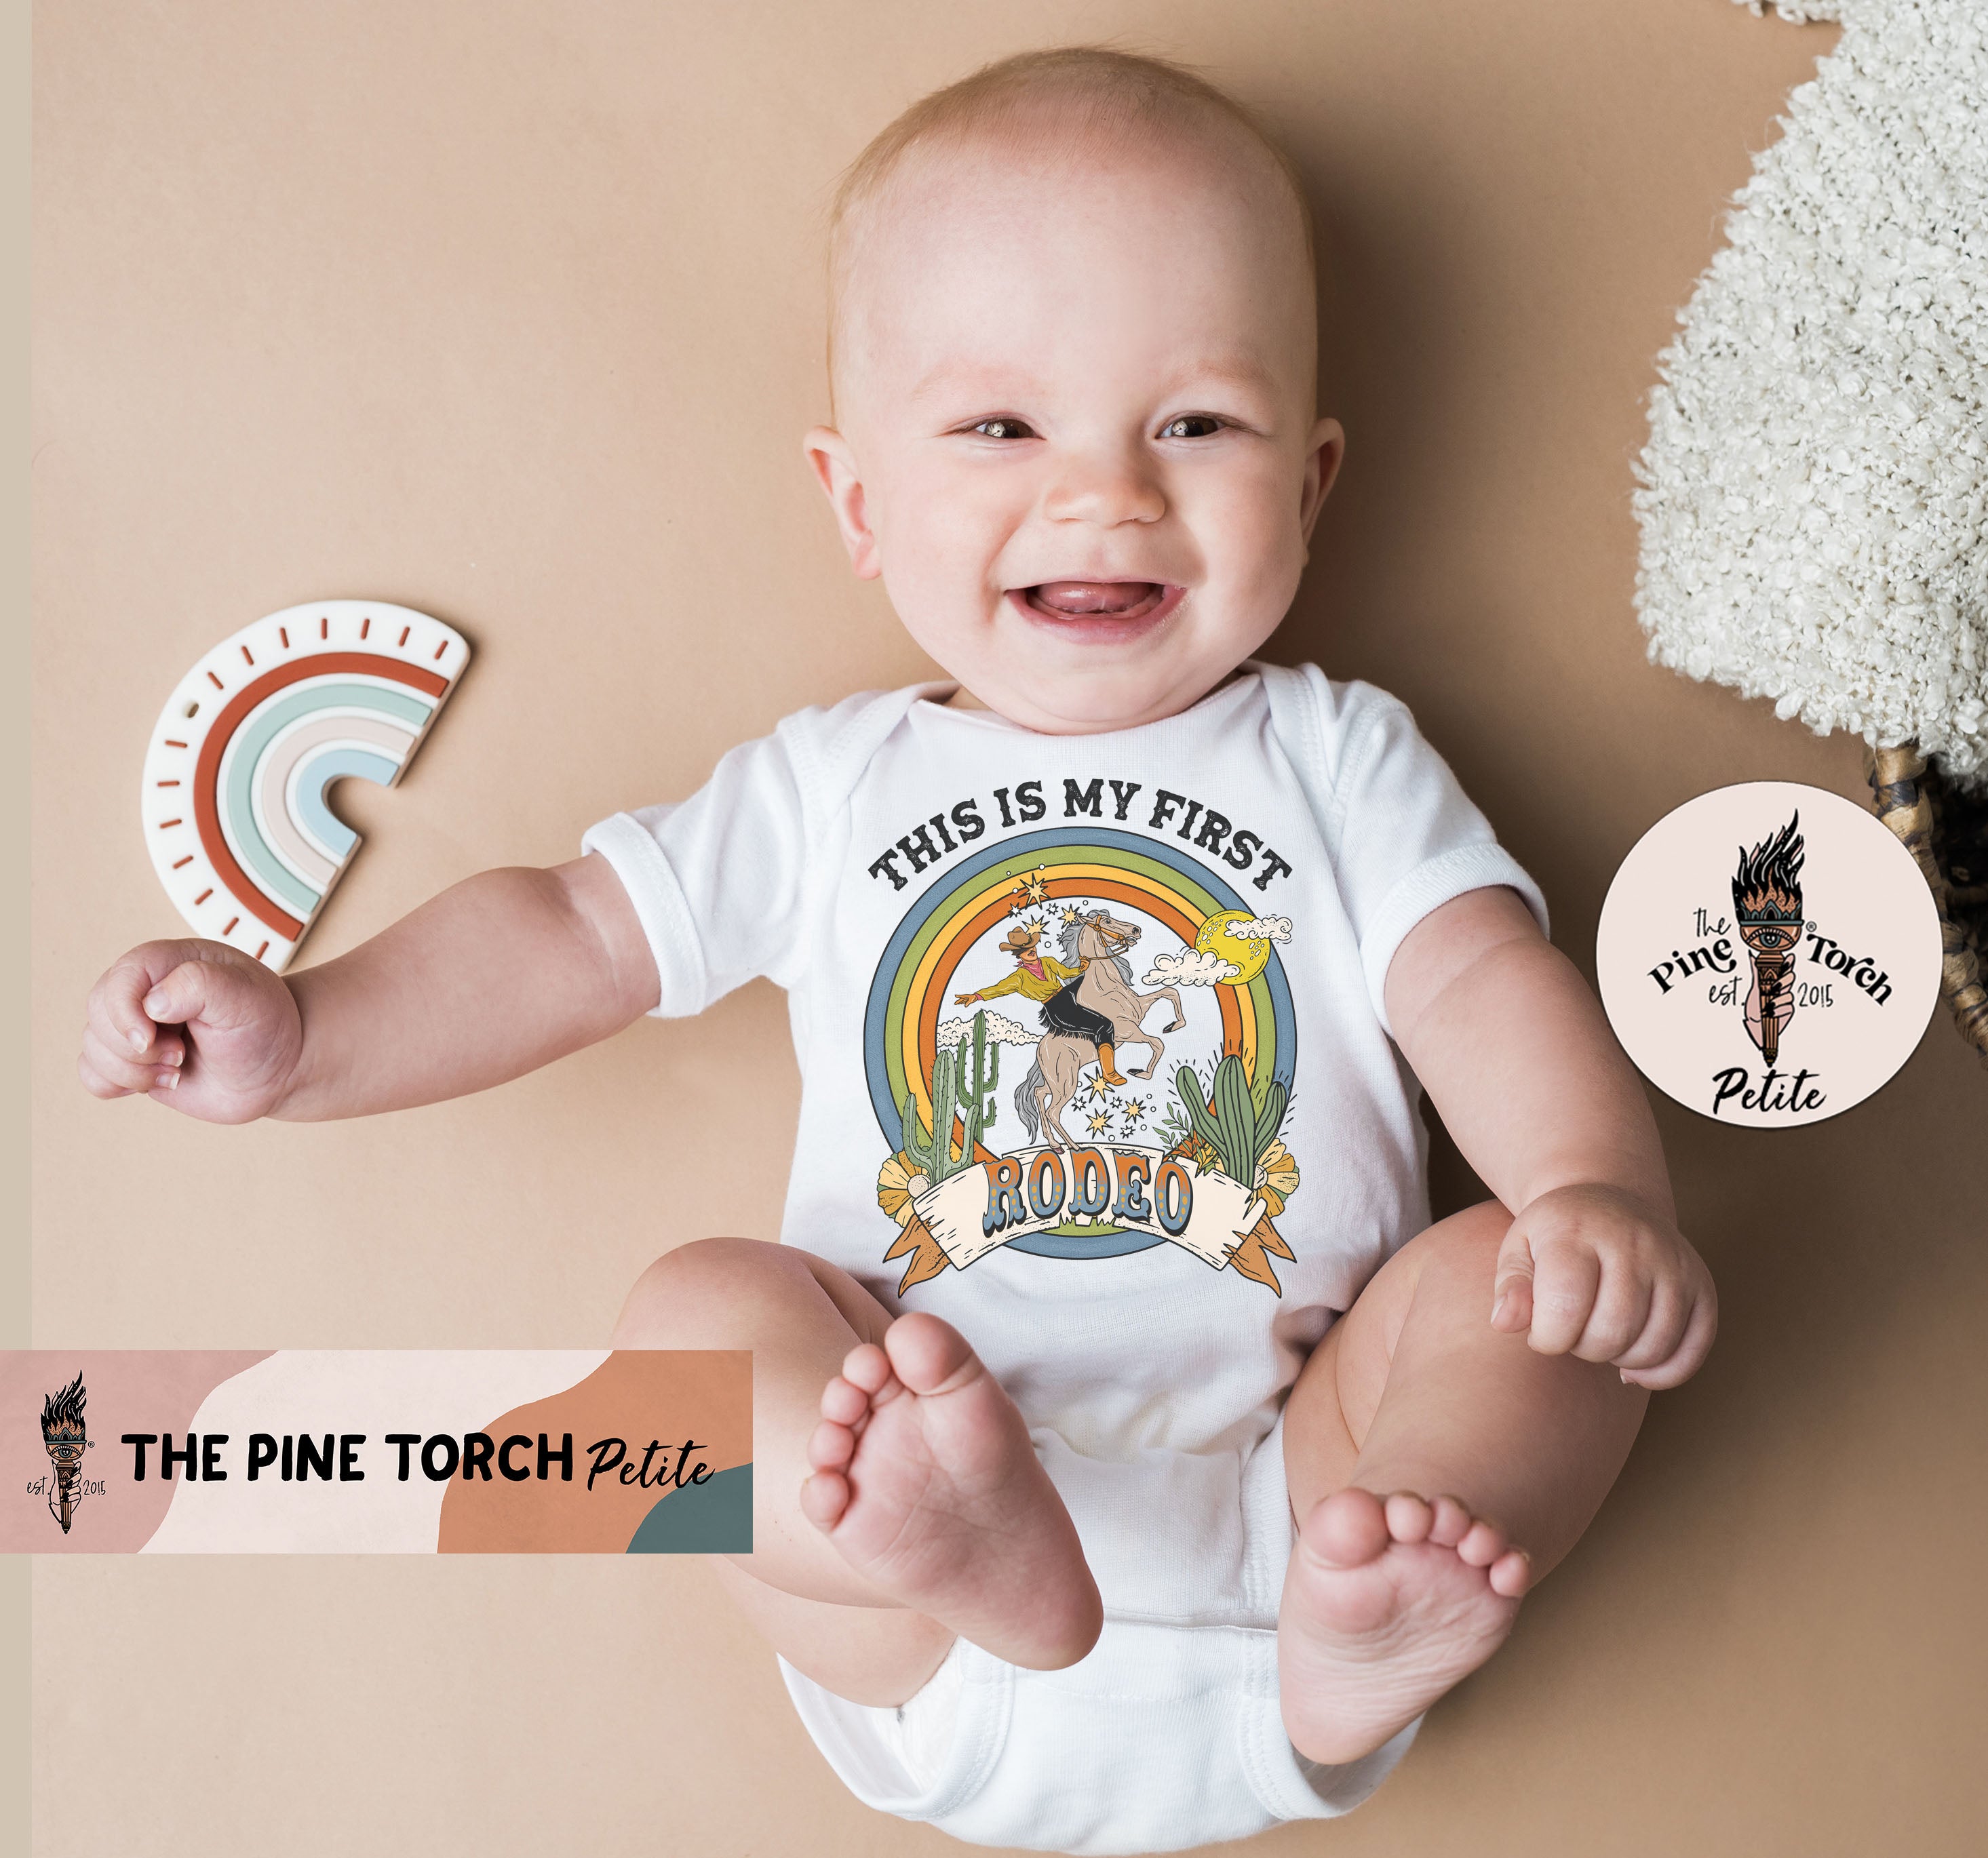 « PERSONALIZED FIRST RODEO » BODYSUIT